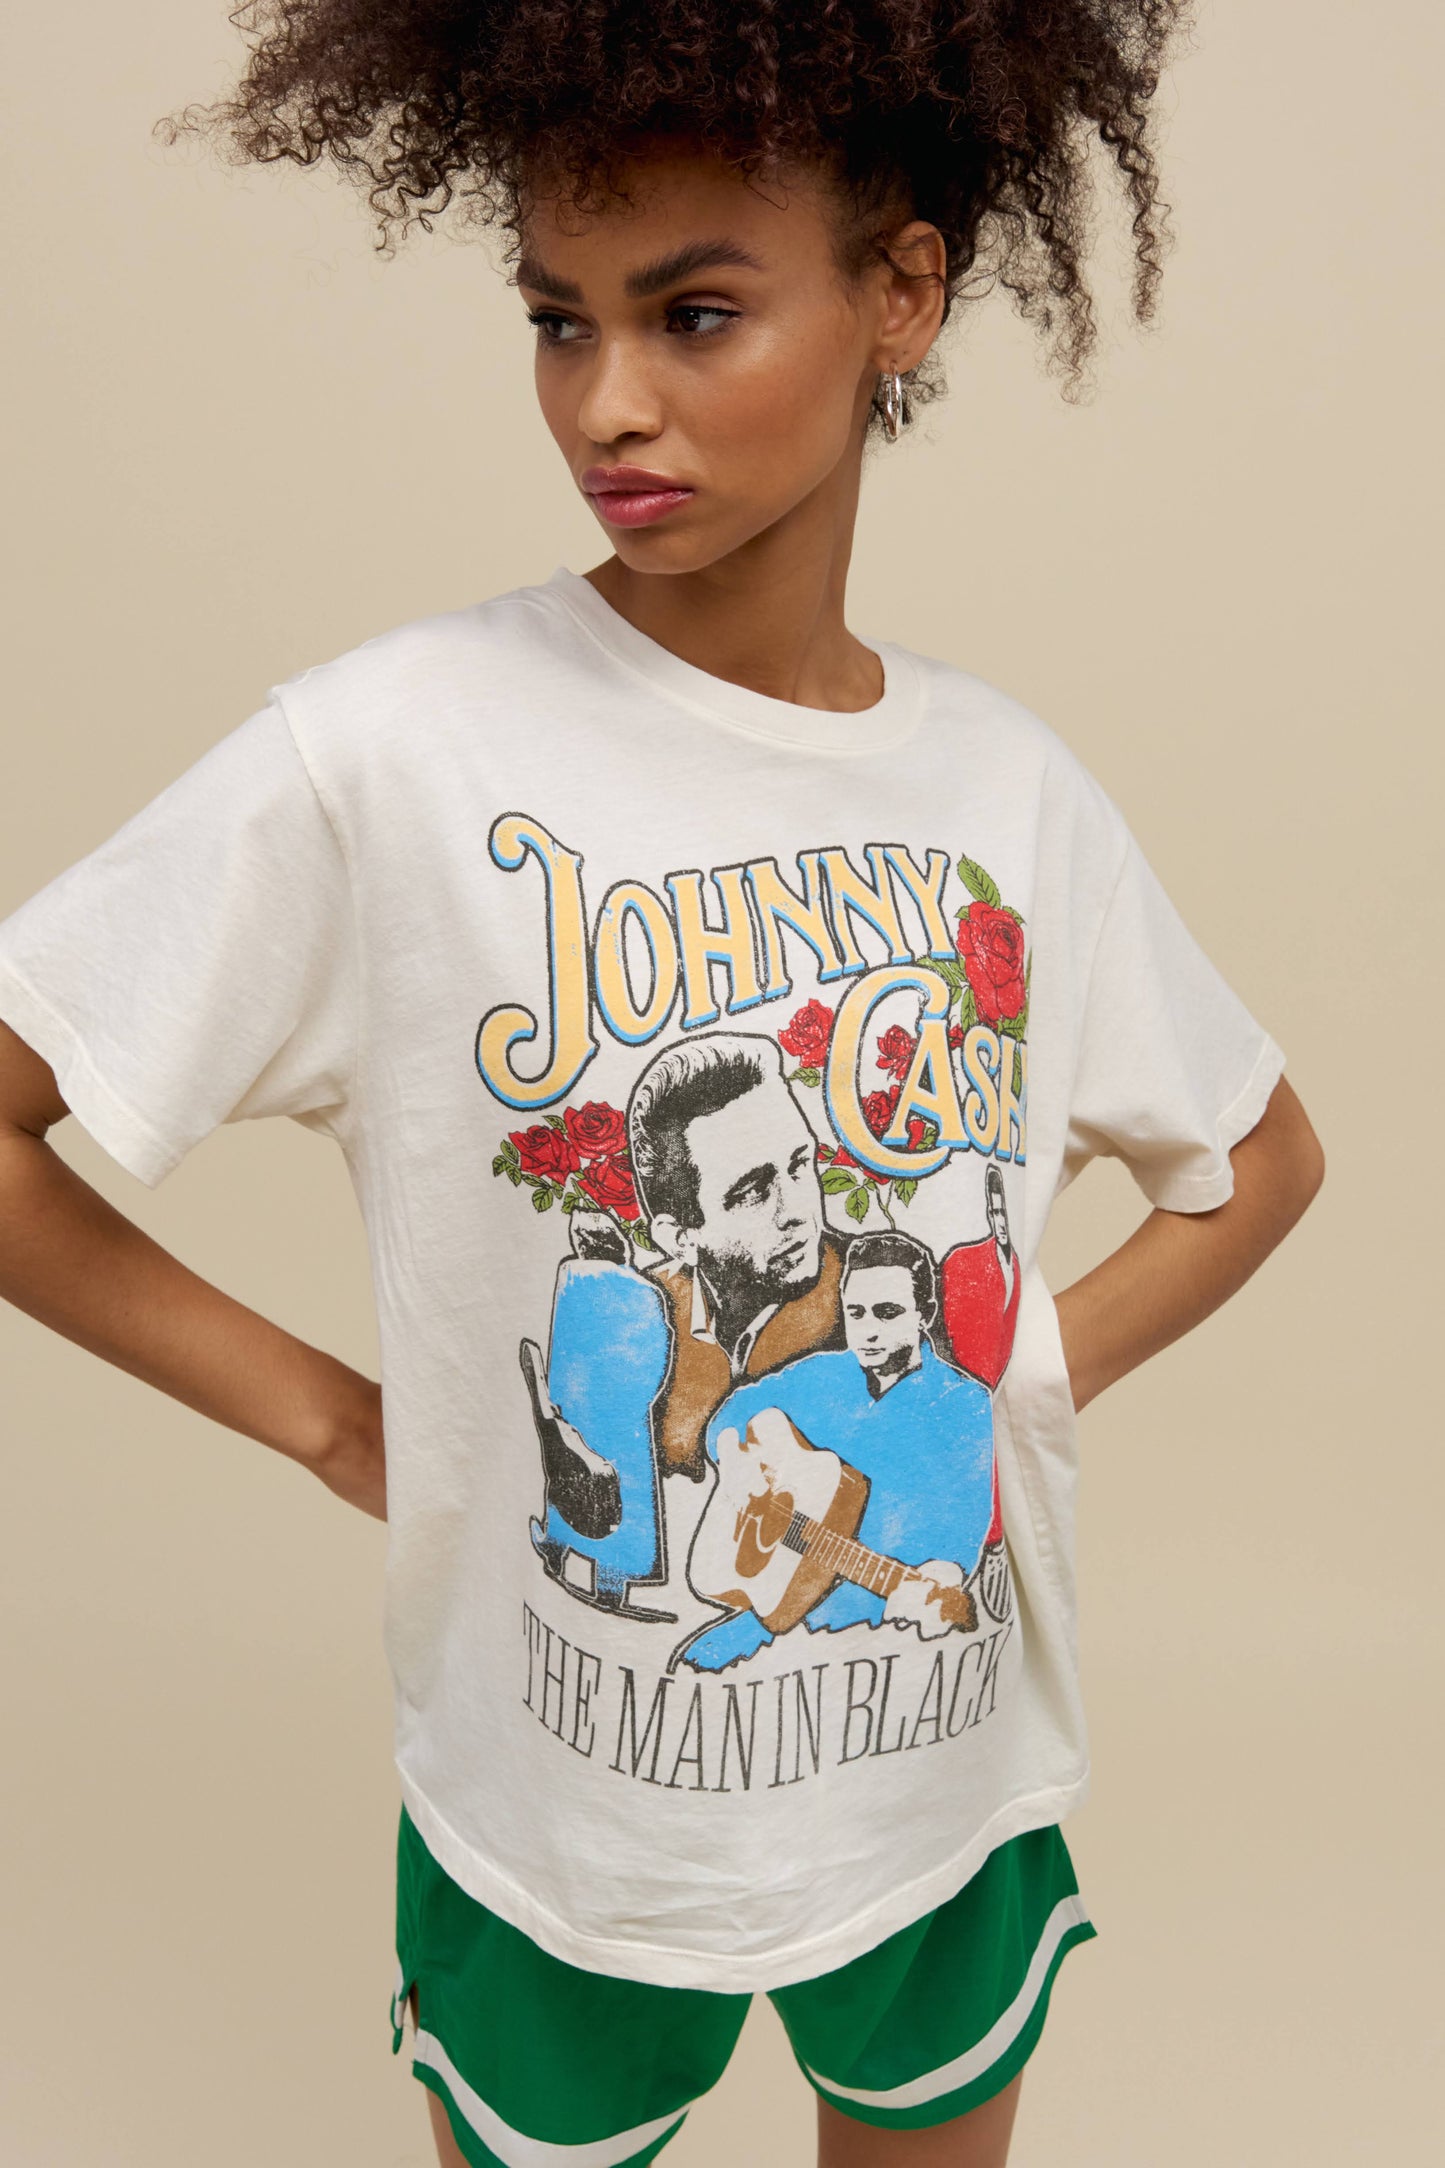 A model featuring a stone vintage tee designed with a portrait of the artist and stamped with 'Johnny Cash' on top.